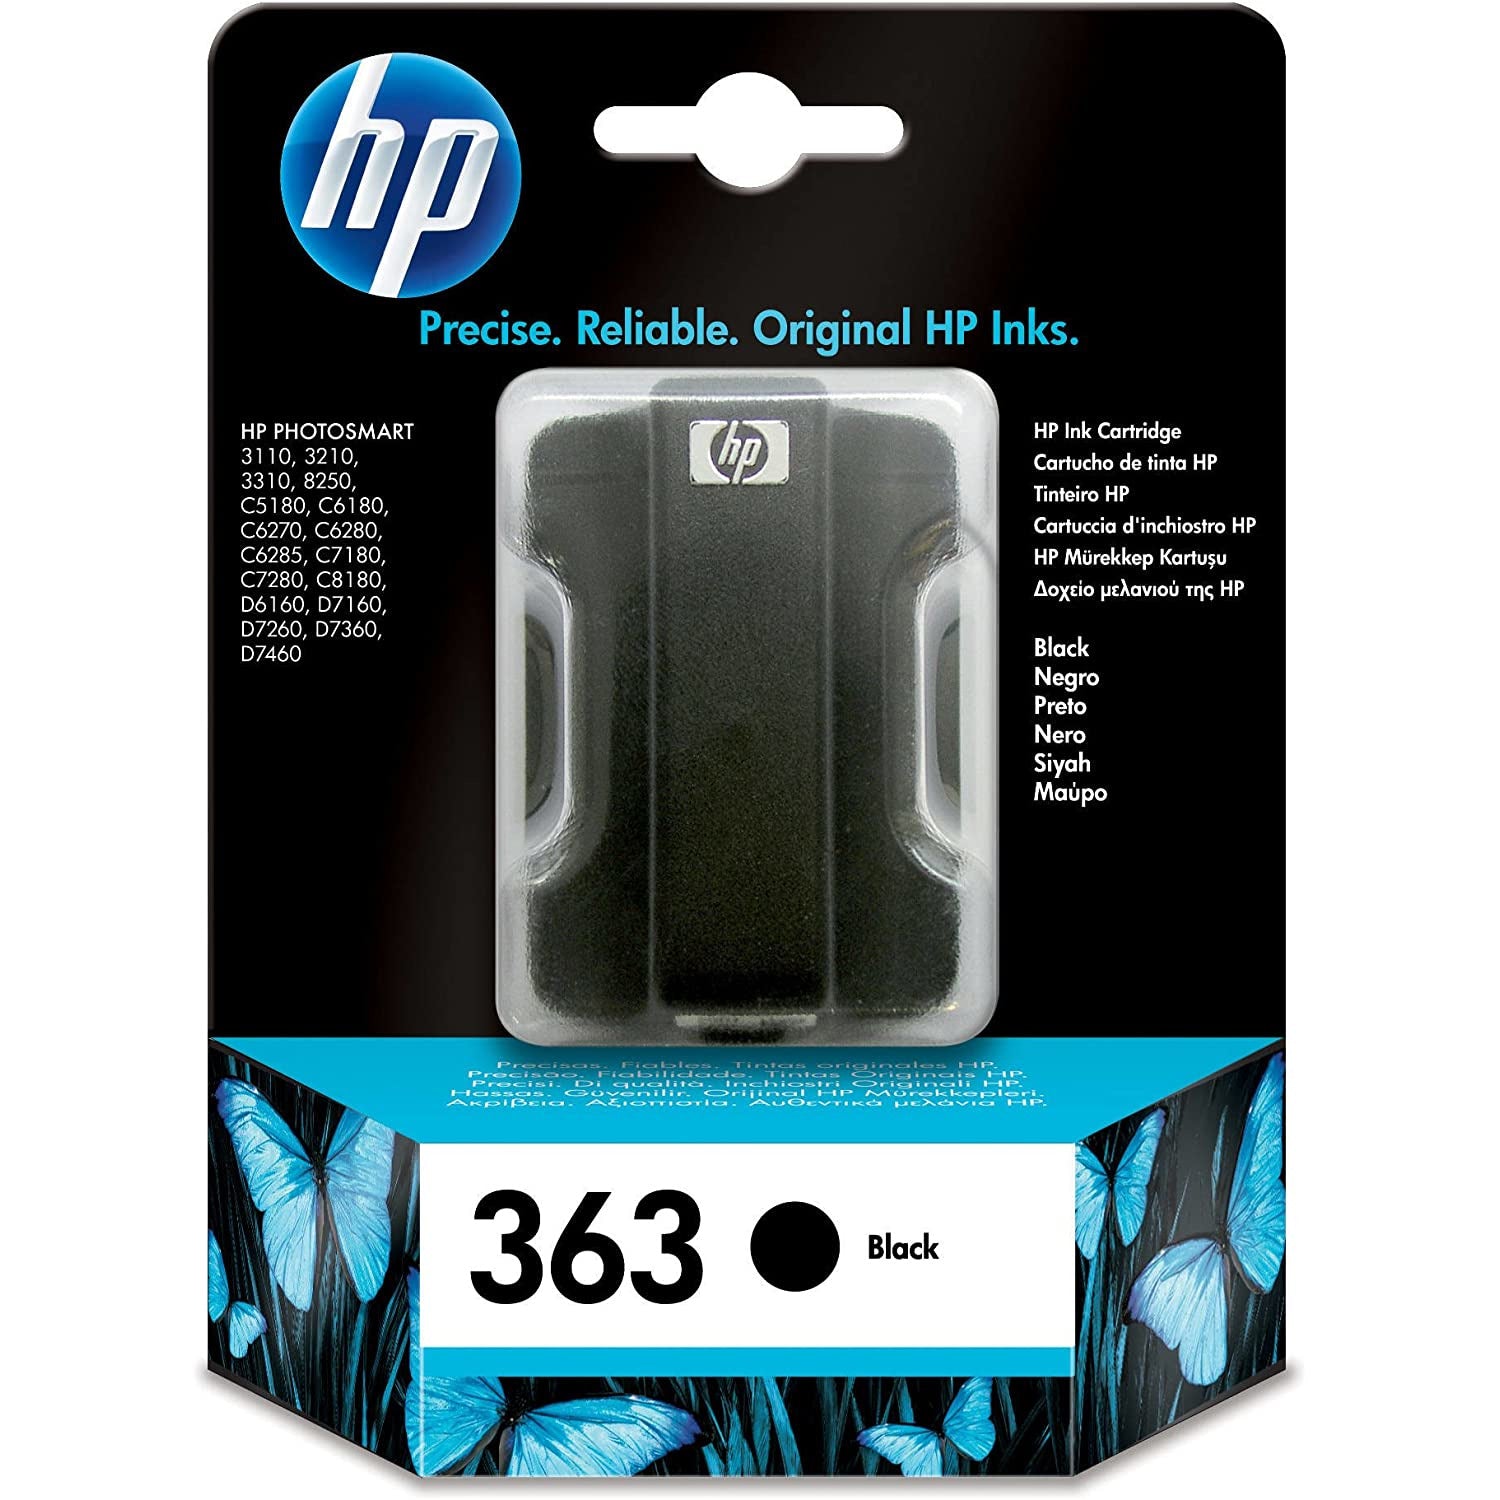 HP 363 Black and Colour ink Cartridge